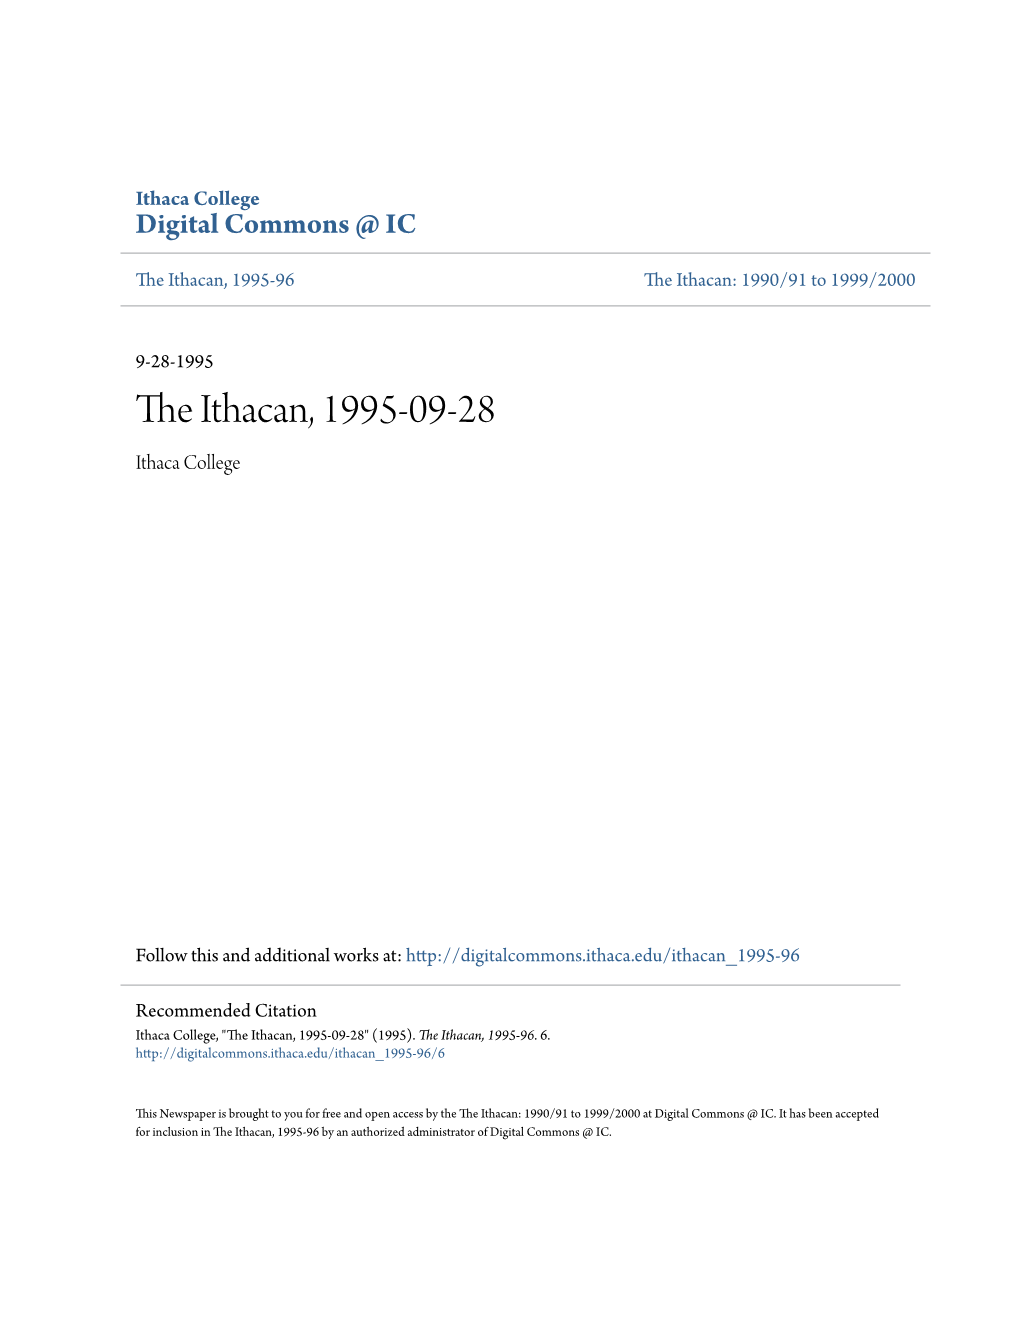 The Ithacan, 1995-09-28